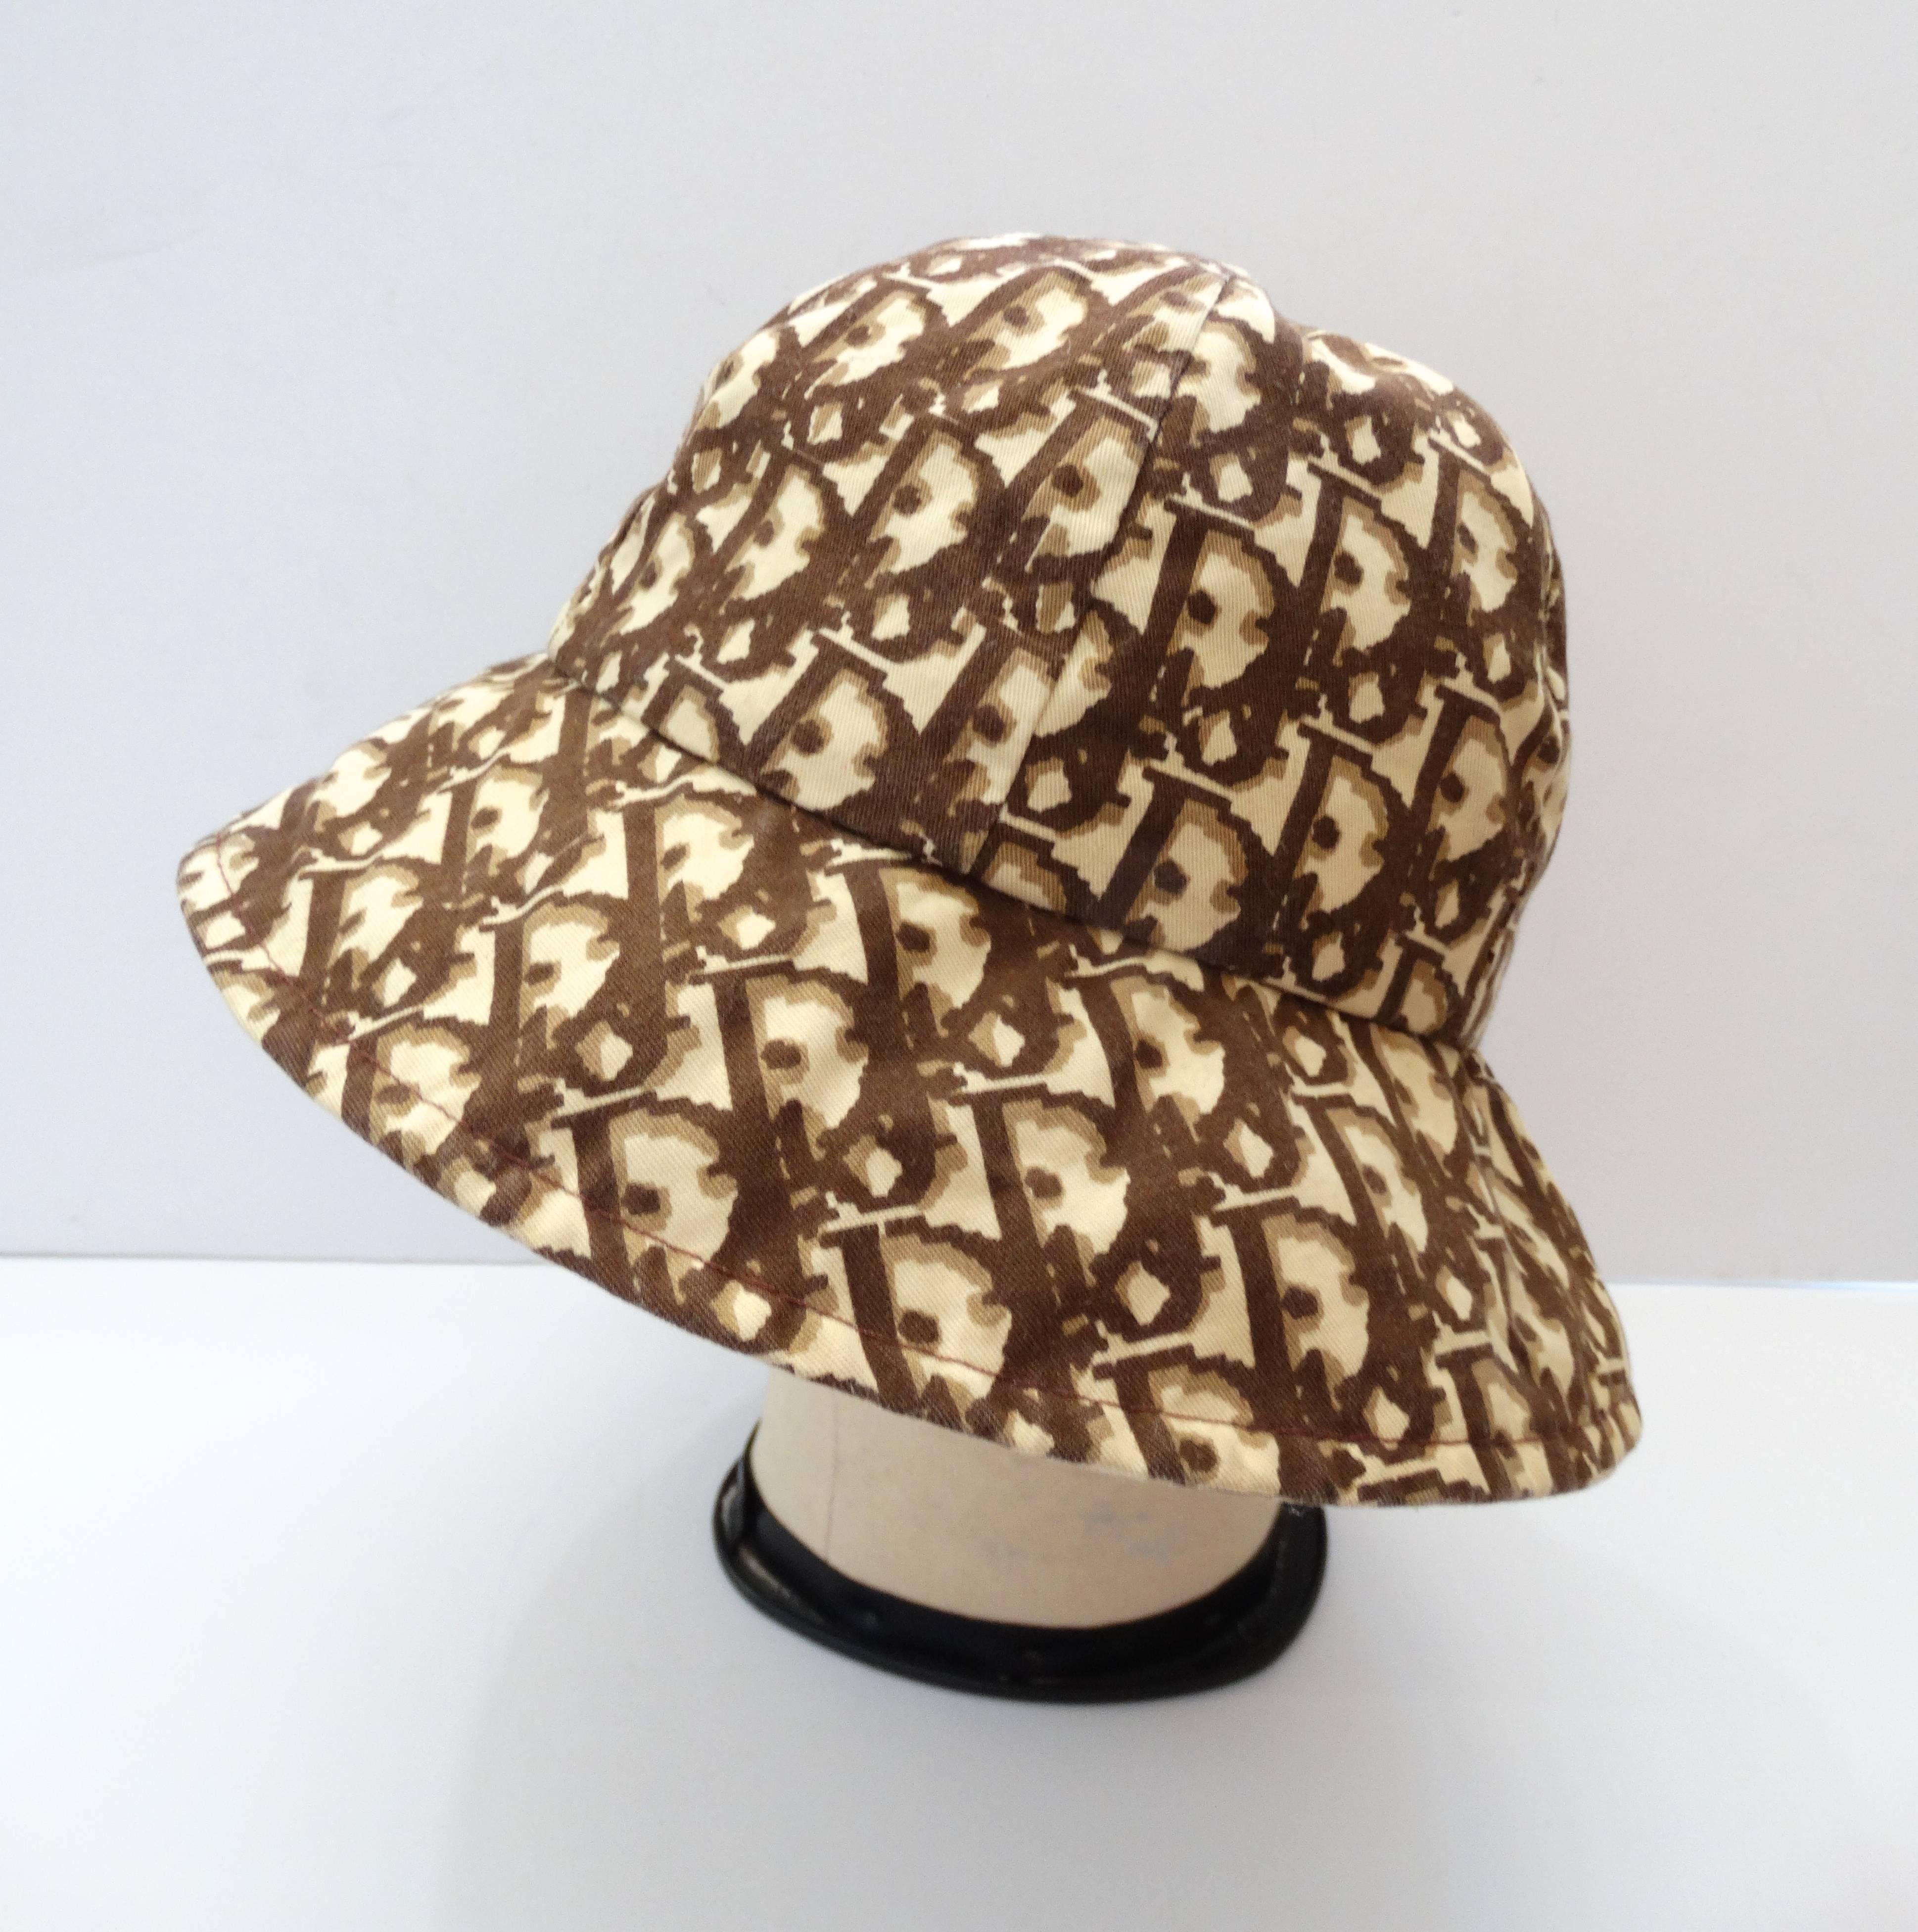 Finally the perfect bucket hat- with a designer twist! Printed with Christian Dior's signature monogram Dior pattern throughout, in shades of tan and brown. Classic bucket hat construction, can be worn with rim up or down. Cotton lined